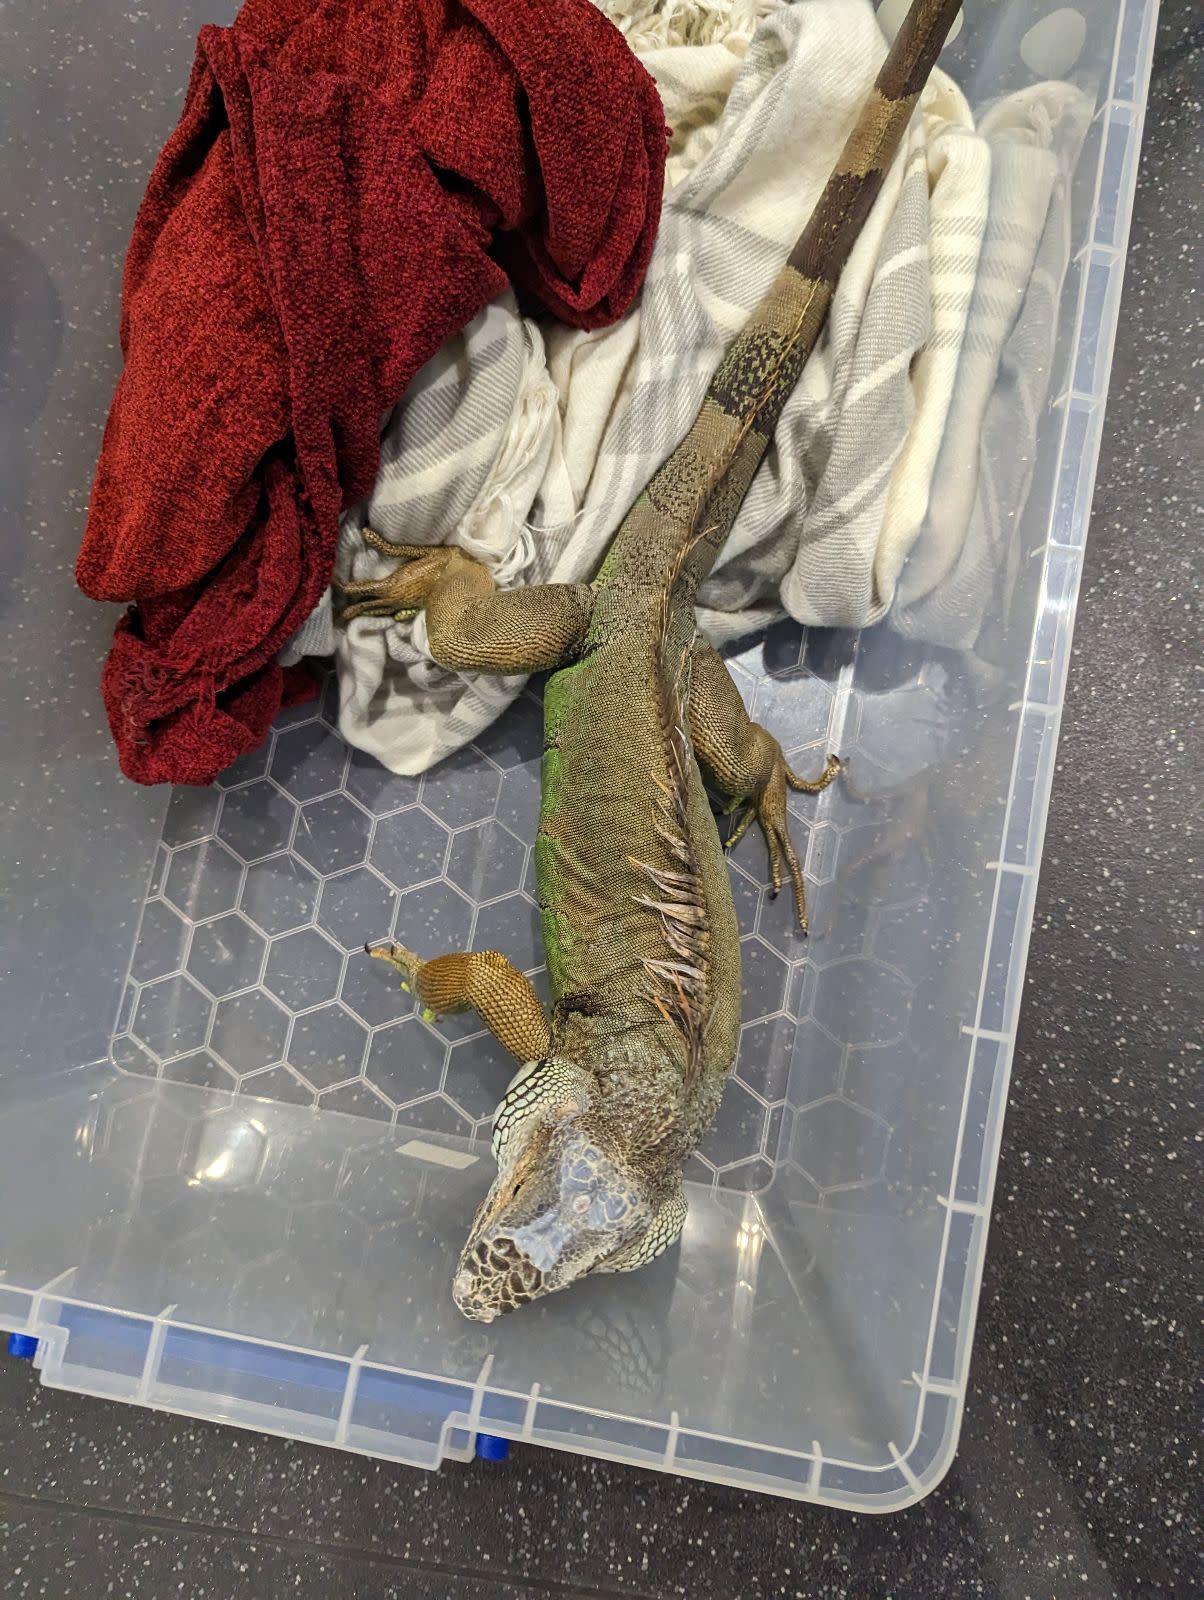 A green iguana can be seen inside a plastic box with only a blanket and towel for warmth